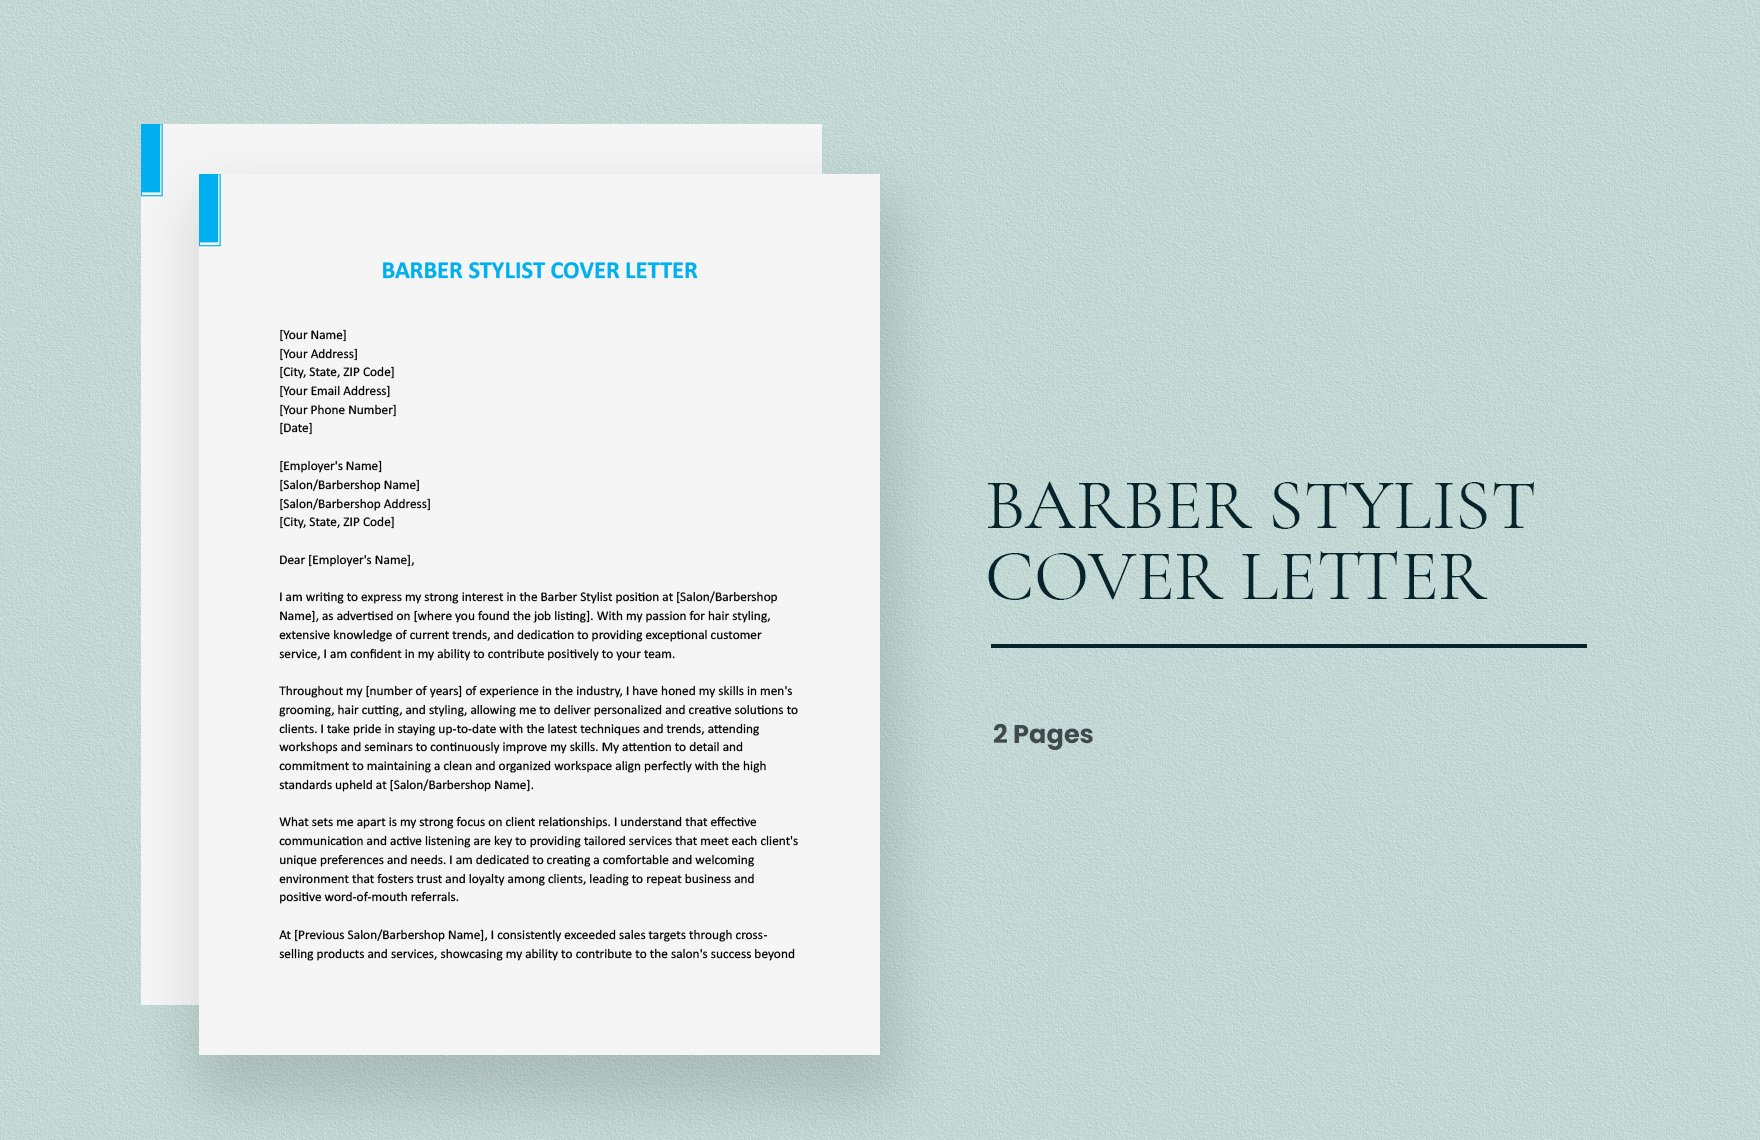 Barber Stylist Cover Letter